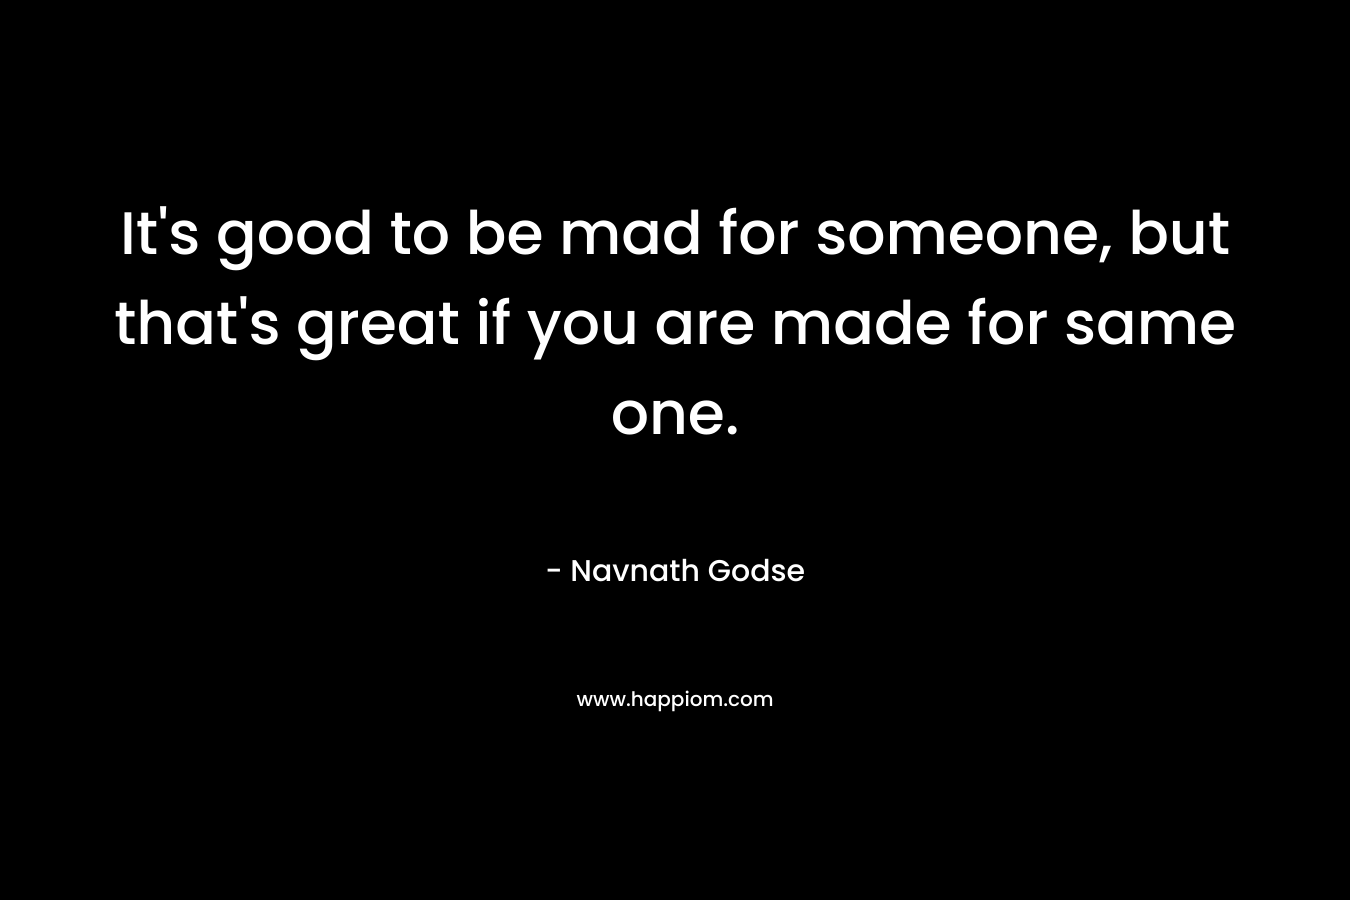 It's good to be mad for someone, but that's great if you are made for same one.